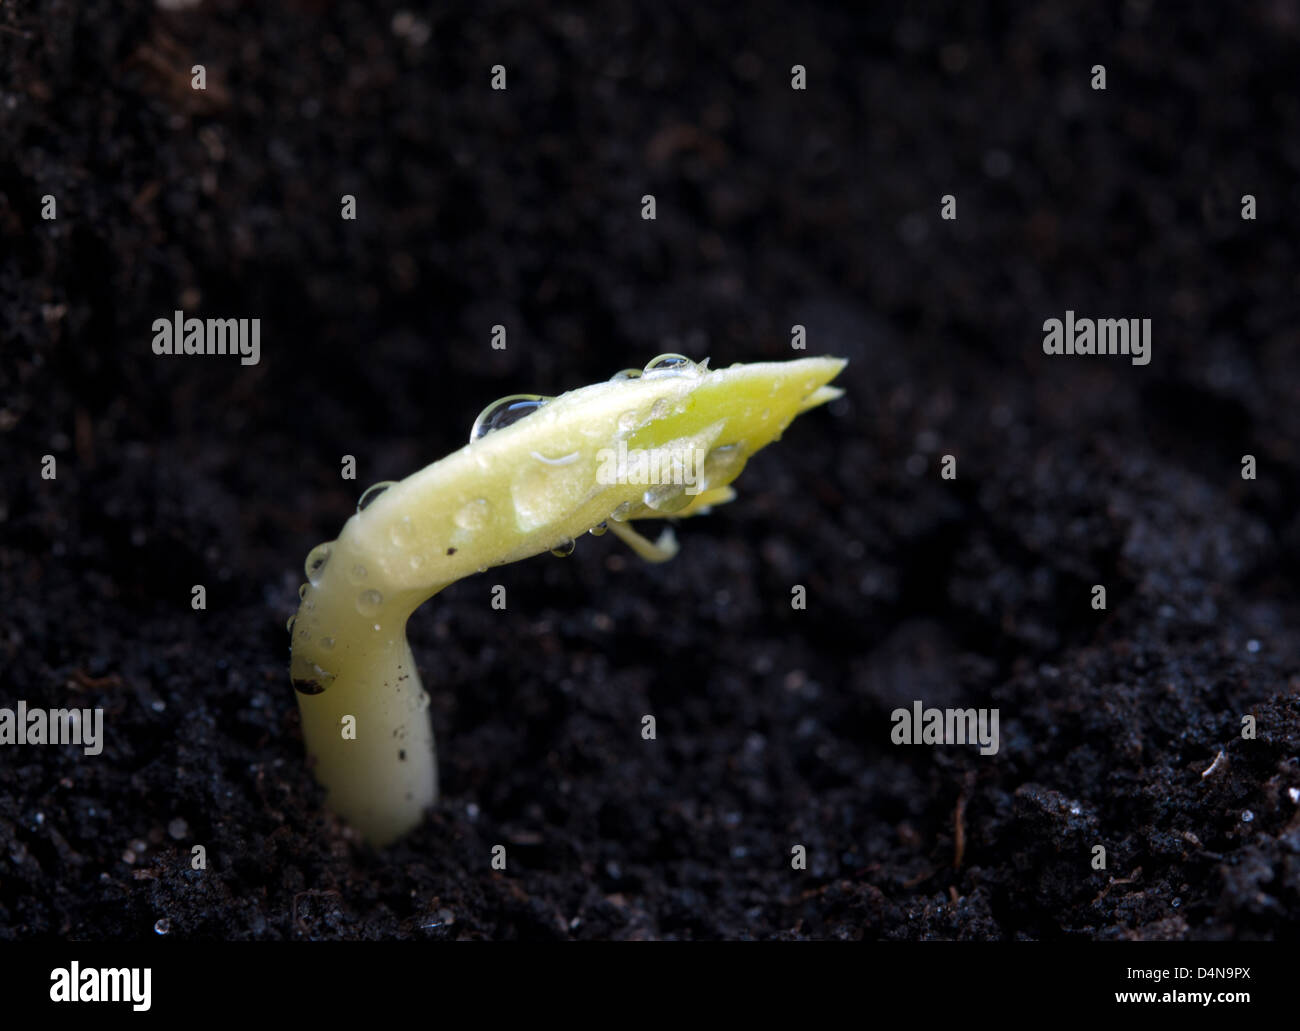 young green plant growing from soil Stock Photo